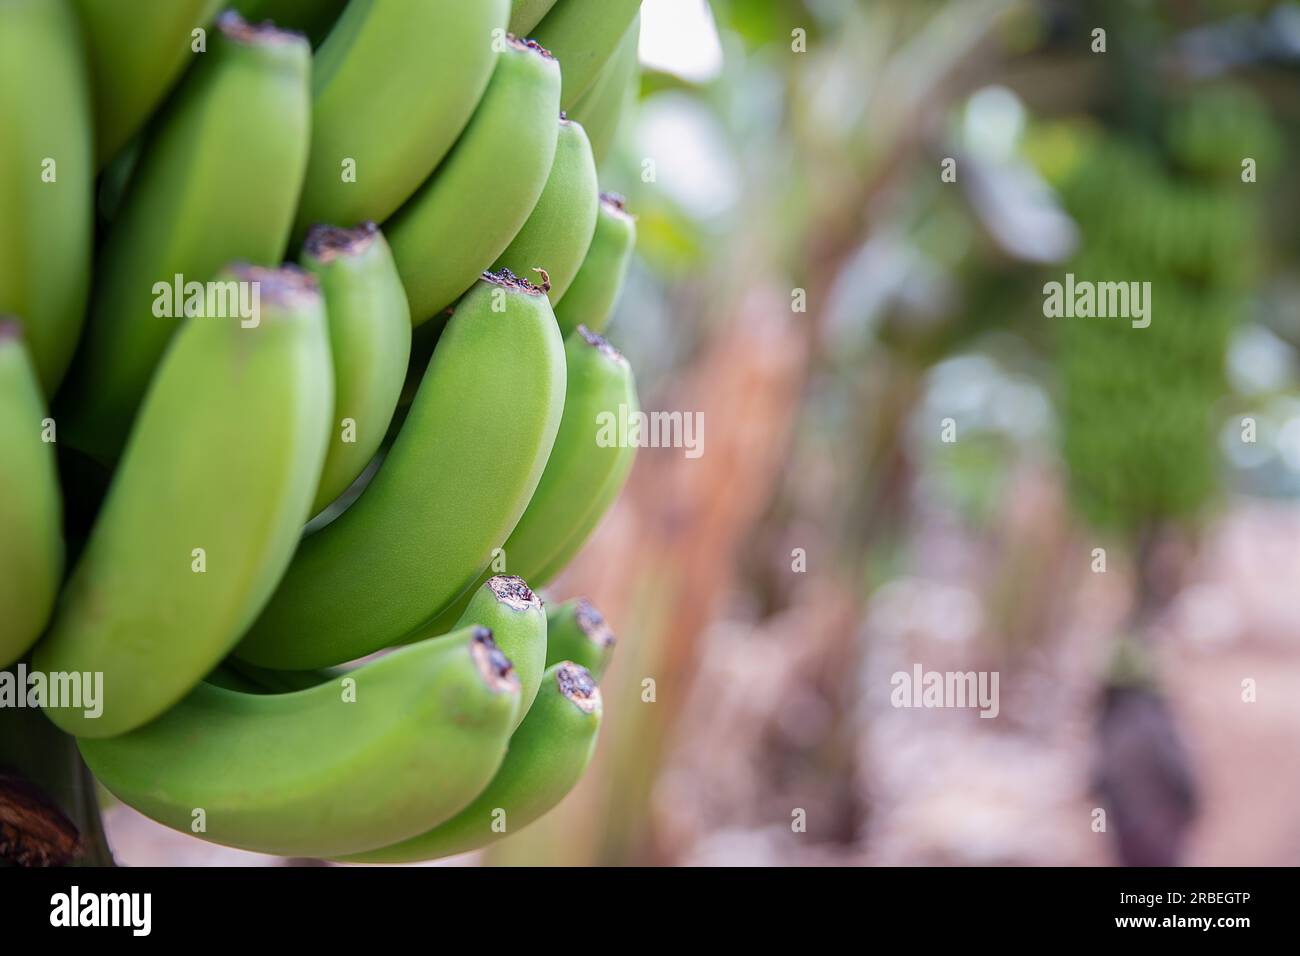 Cropped view of a bunch of bananas hanging on a tree in one of the numerous plantations in Tenerife, Canary Islands, Spain, delicious fruit on a tree Stock Photo